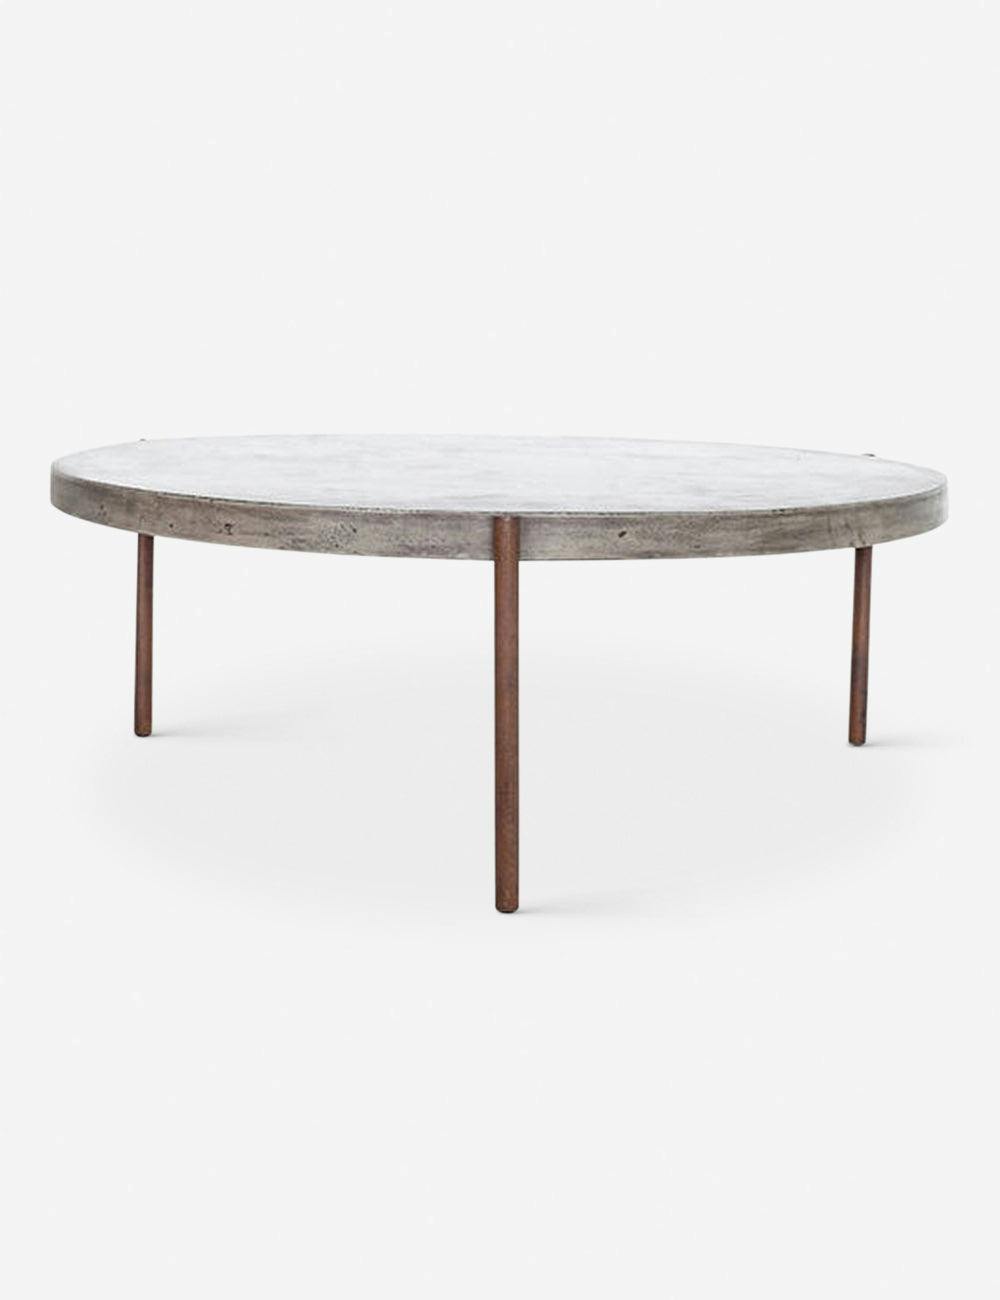 Harrison Steel Legs and Concrete Surface Round Coffee Table